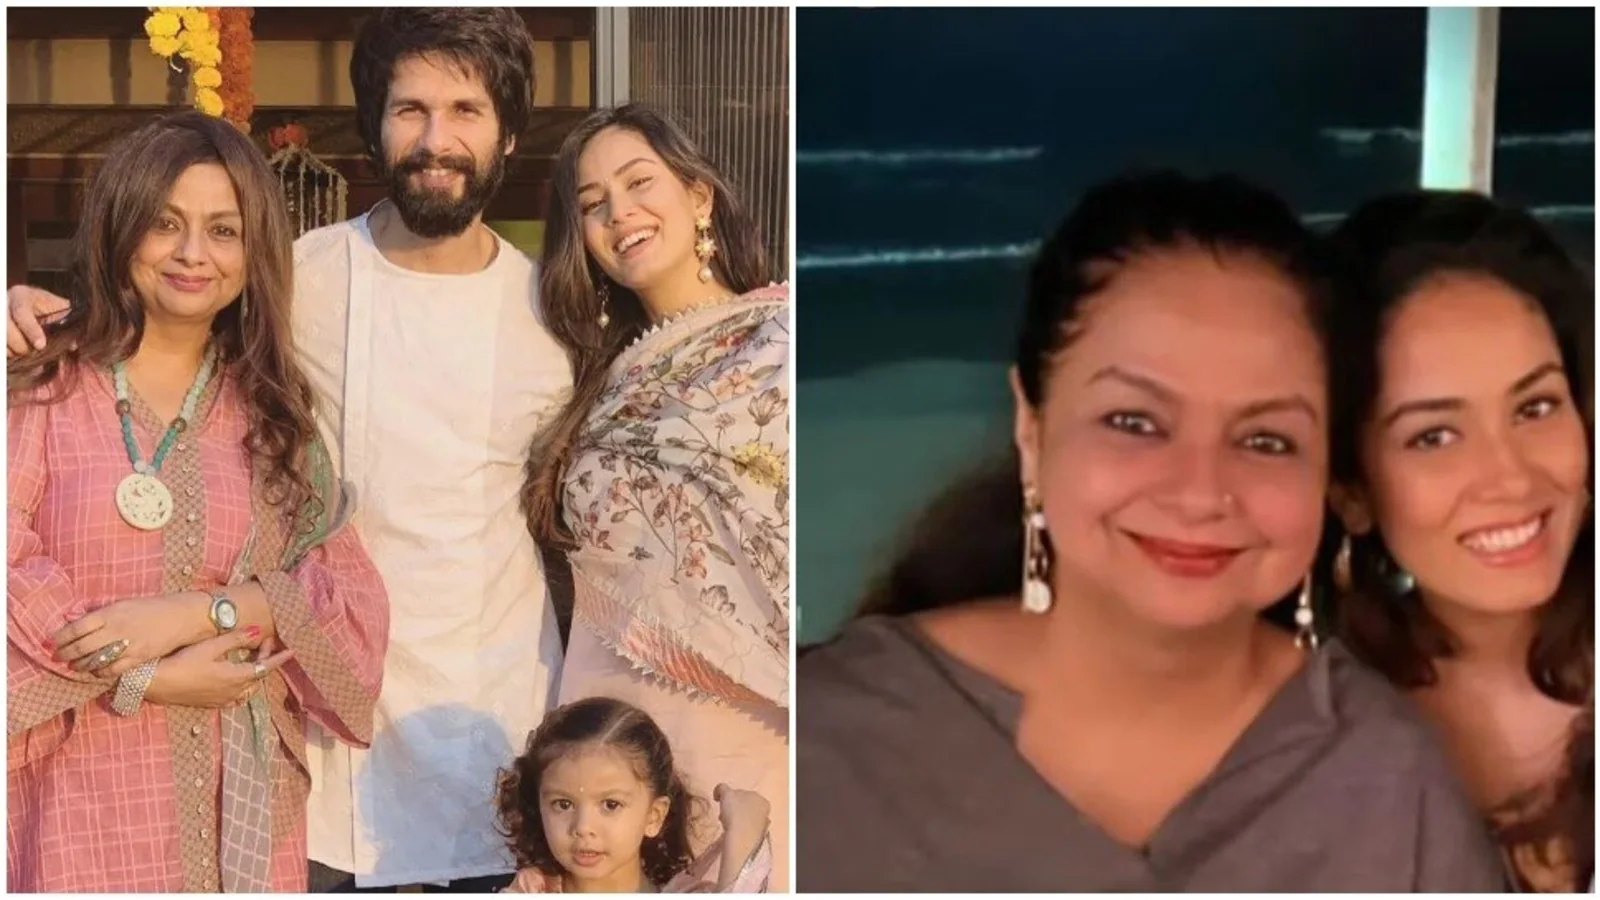 Neliima Azeem makes starring appearances in Mira Rajput and Shahid Kapoor’s Women’s Day posts. See pics